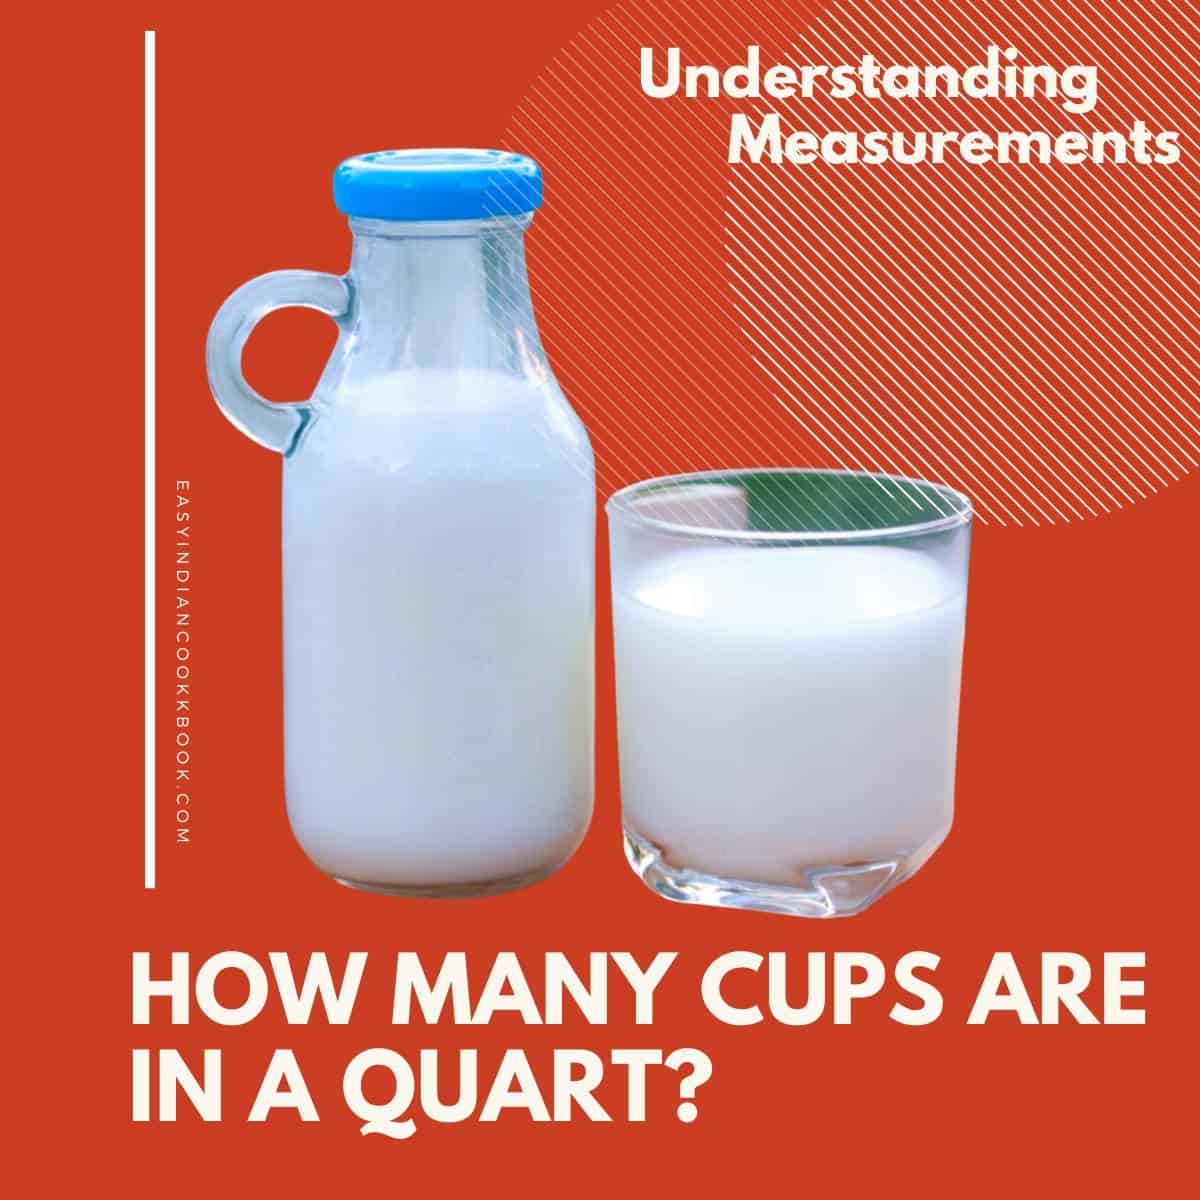 How many cups are in a quart.